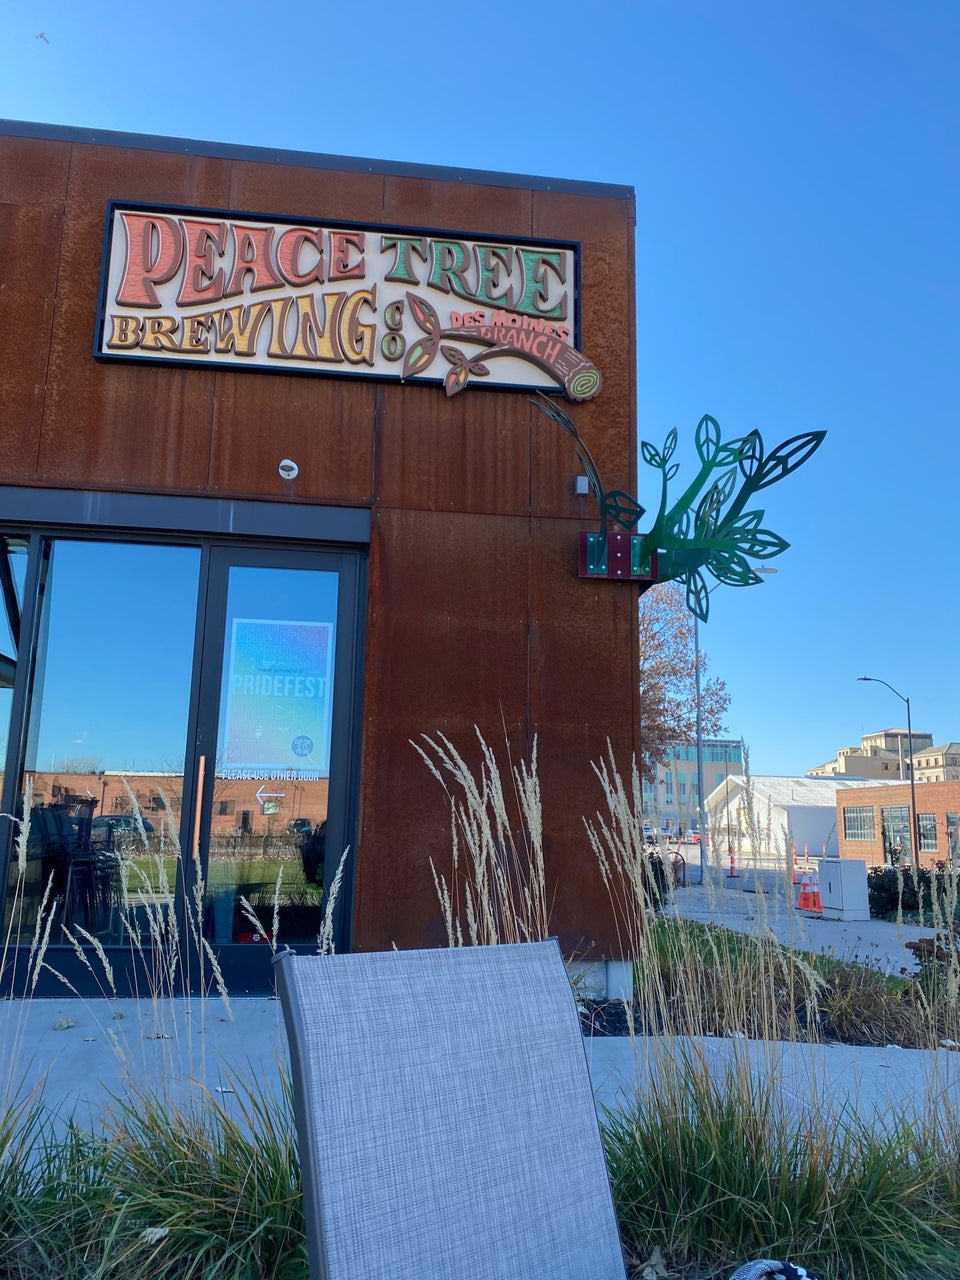 Peace Tree Brewing Co. - Des Moines Branch